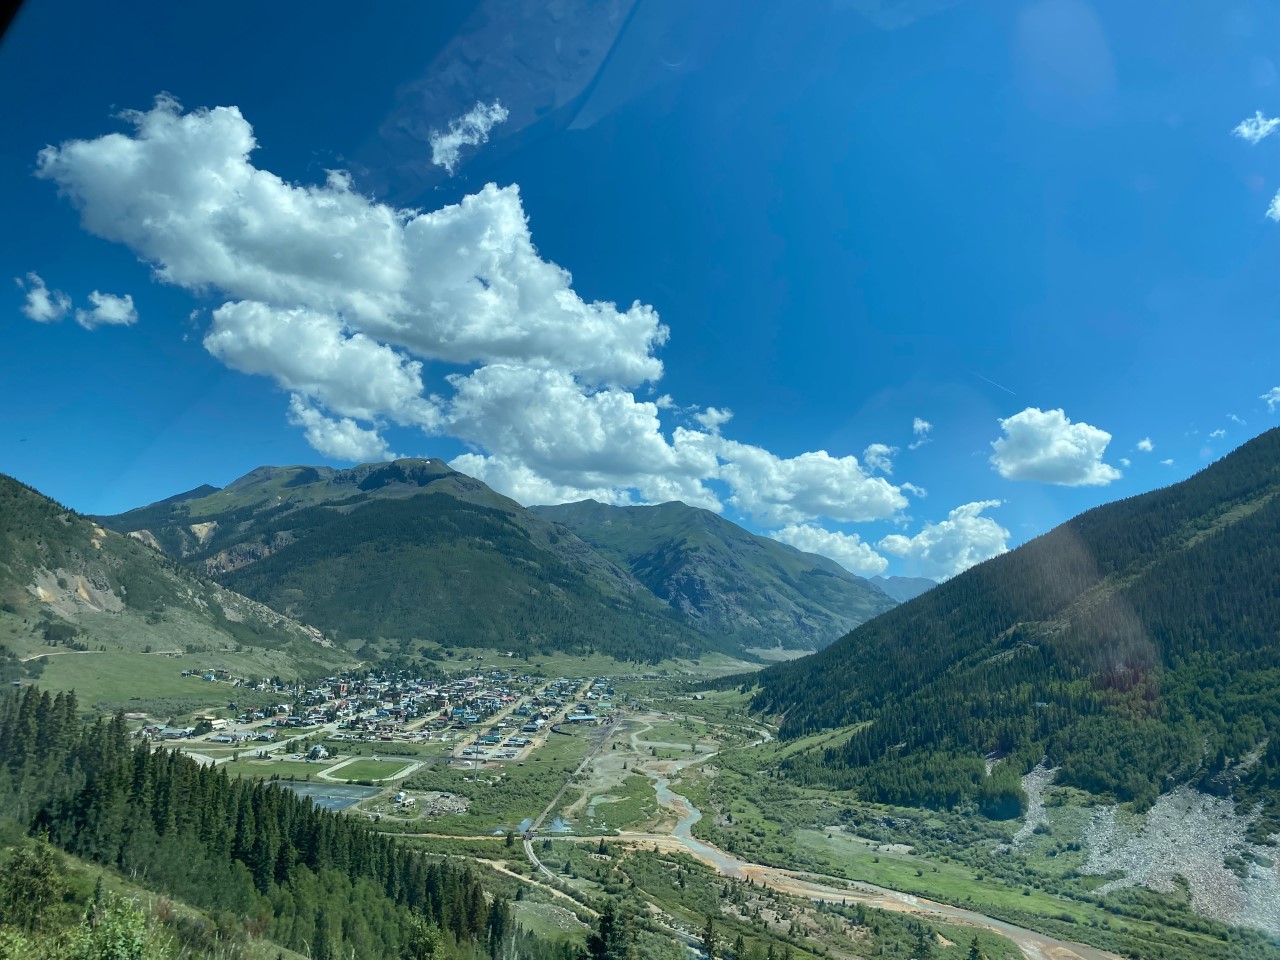 View of Silverton, Colorado from Million Dollar Highway